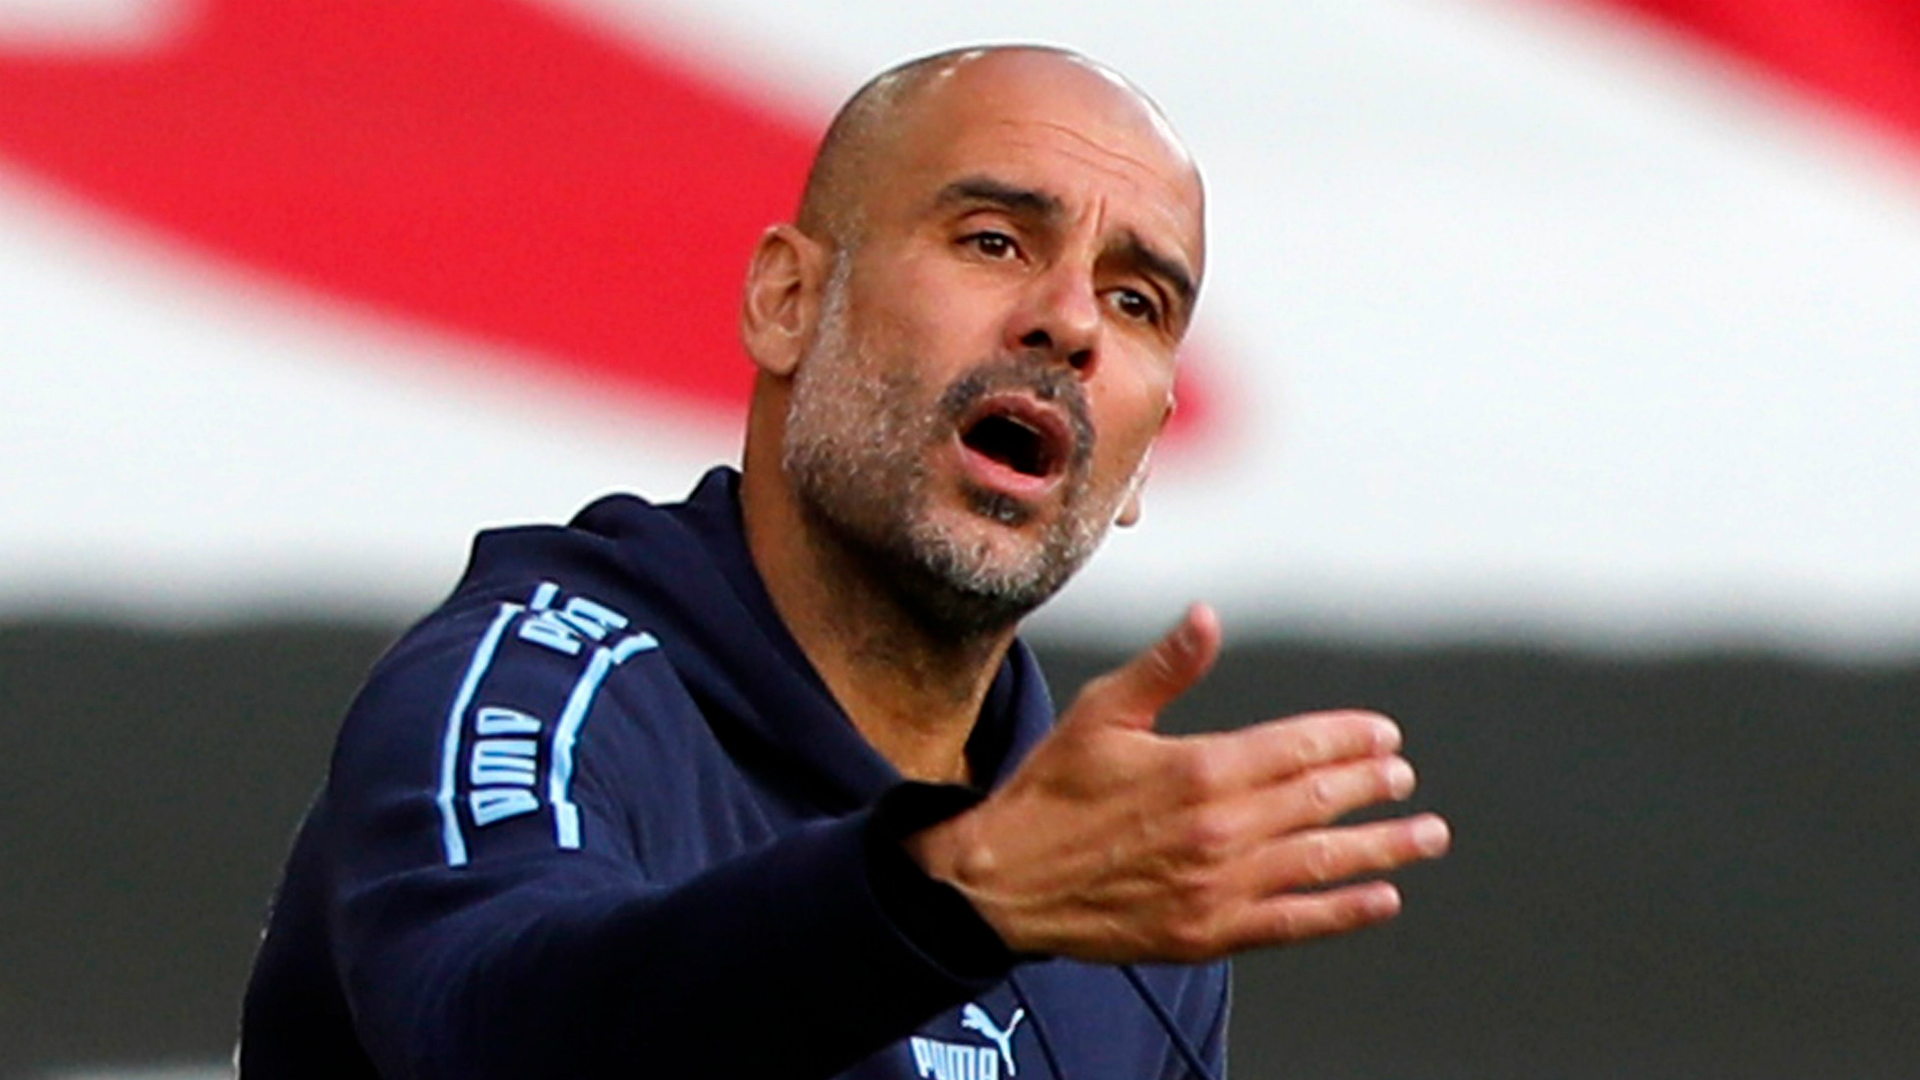 Manchester City still have "incredible targets" to fight for, despite Pep Guardiola's frustration over their loss at Southampton.